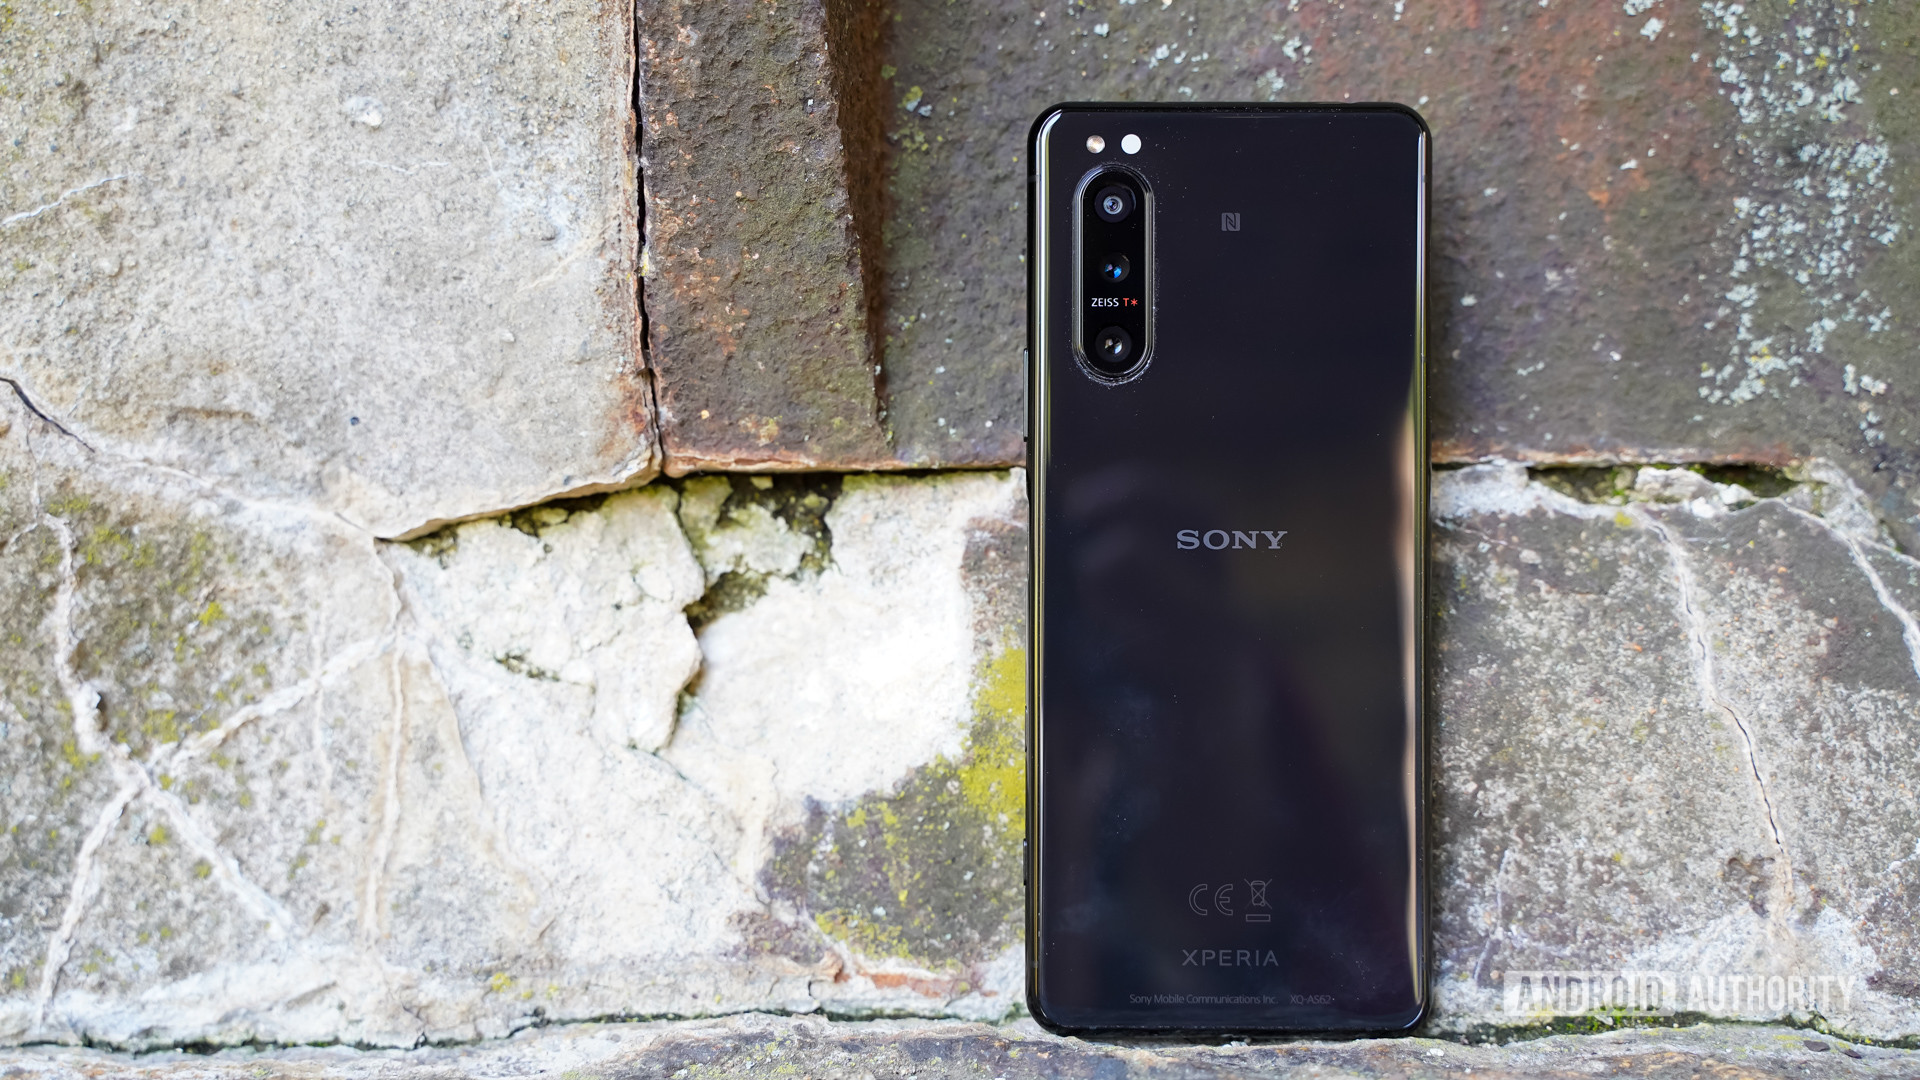 Sony Xperia 5 II review: Perhaps Sony's best phone yet